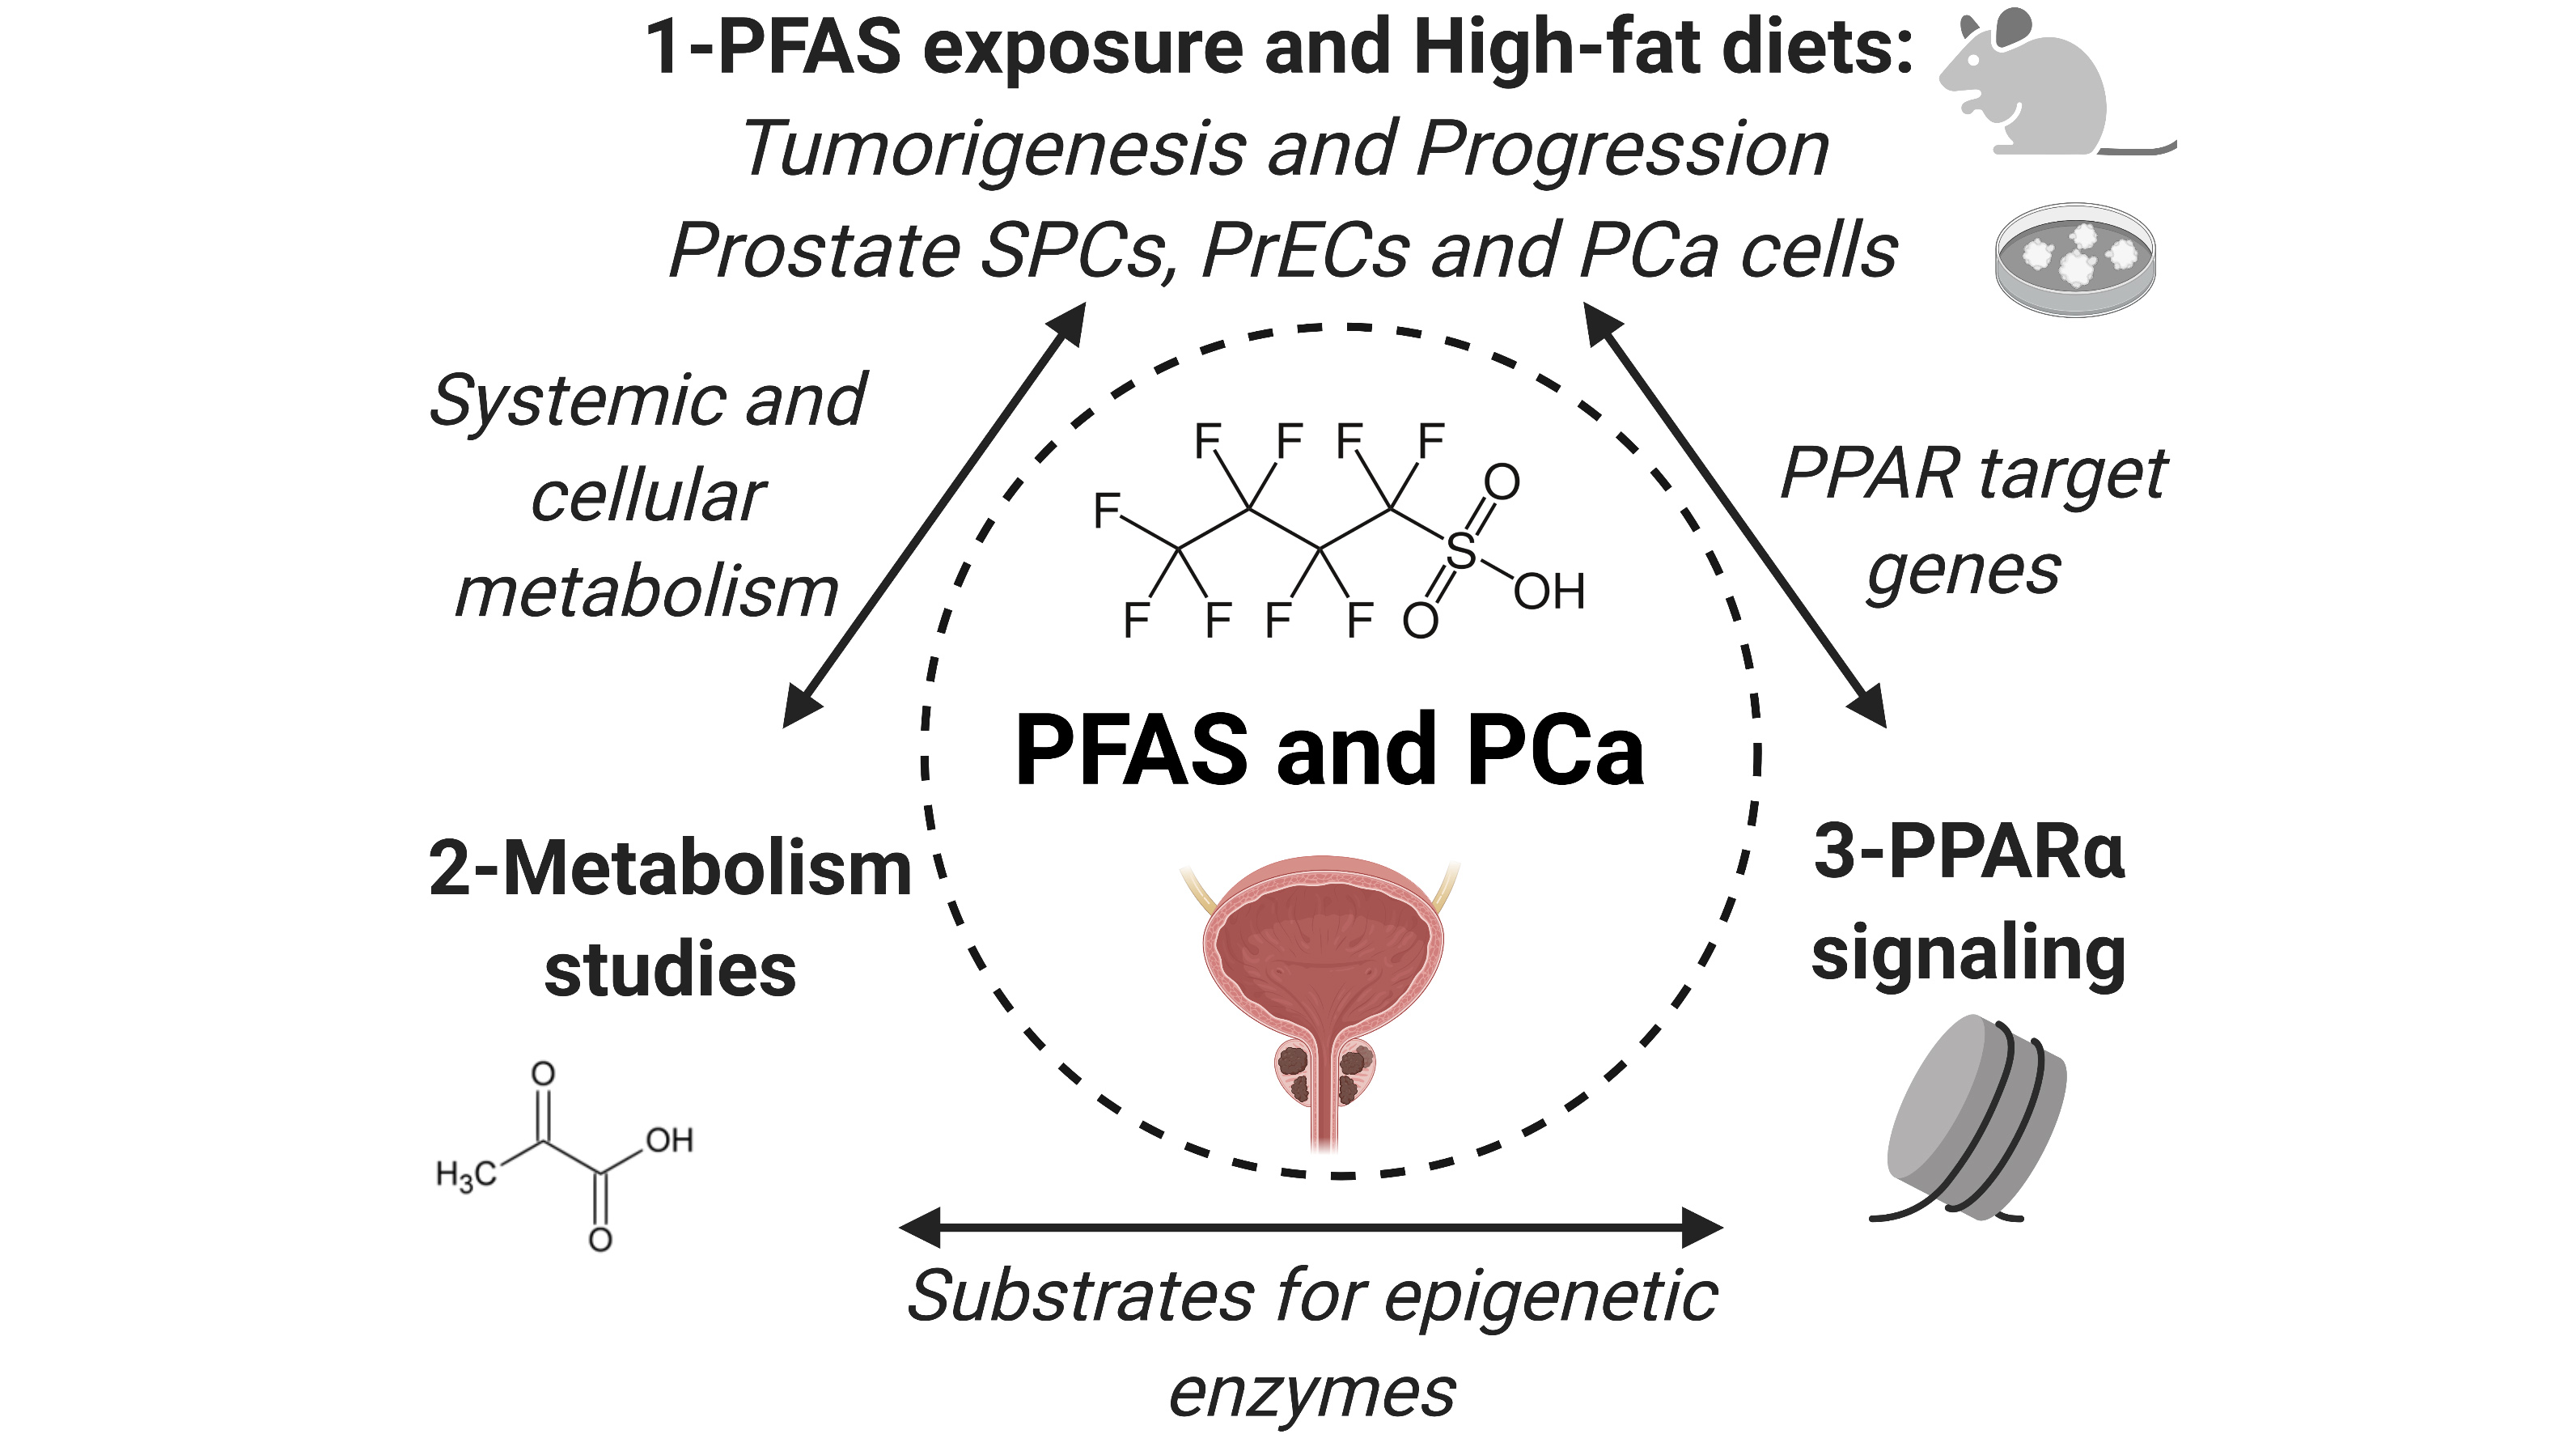 PFAS exposure and high-fat diets